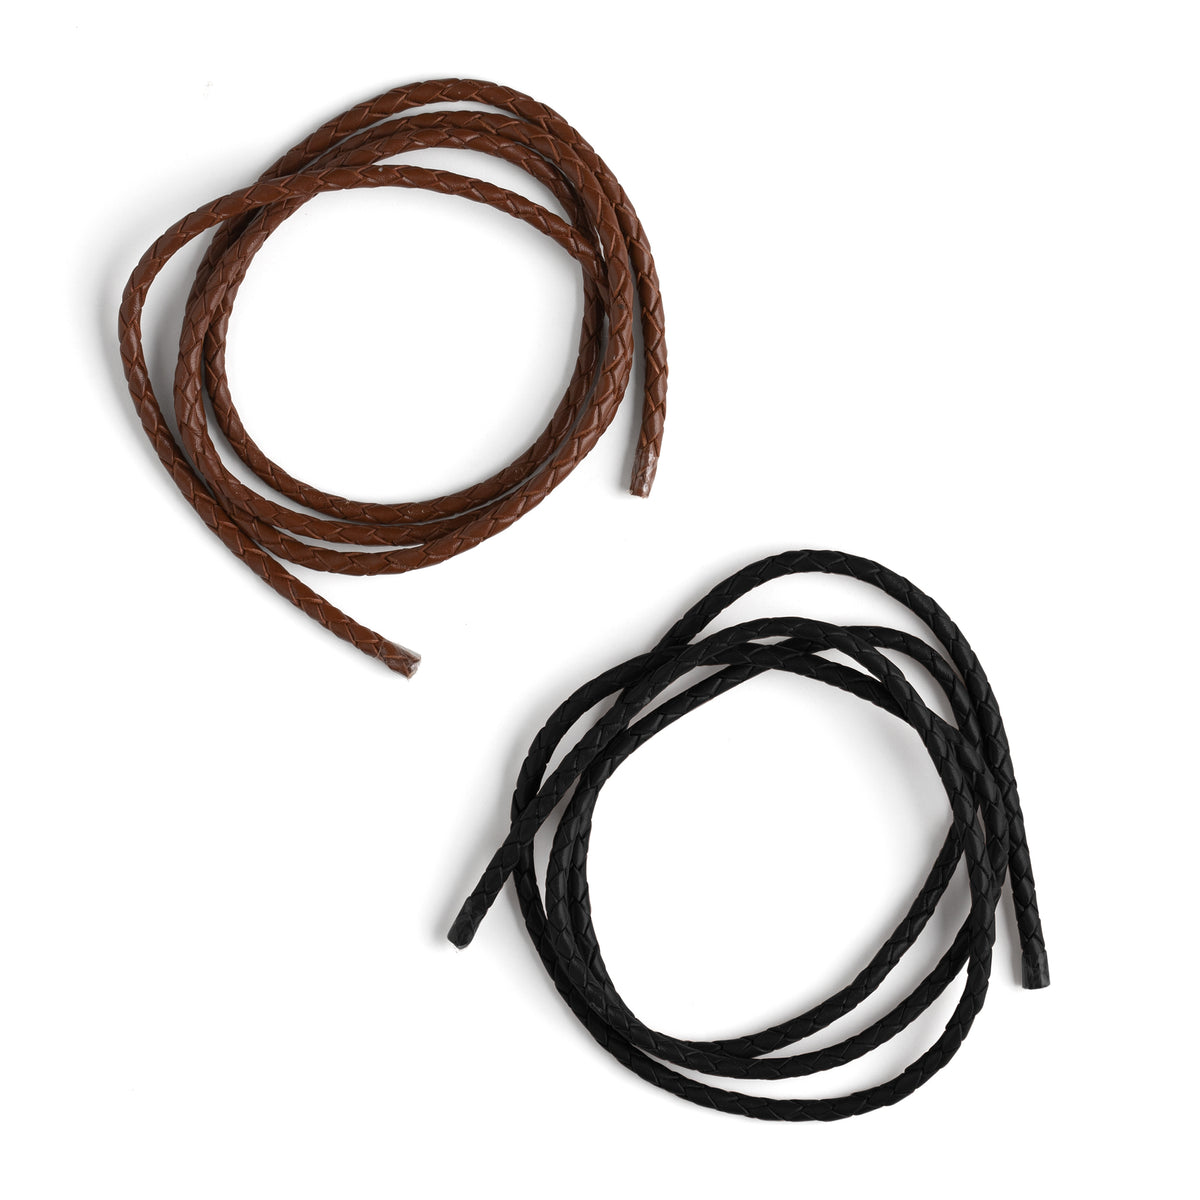 5 Yards 4mm Braided Leather Cords Round Leather Strap Bolot Tie Antique Brown